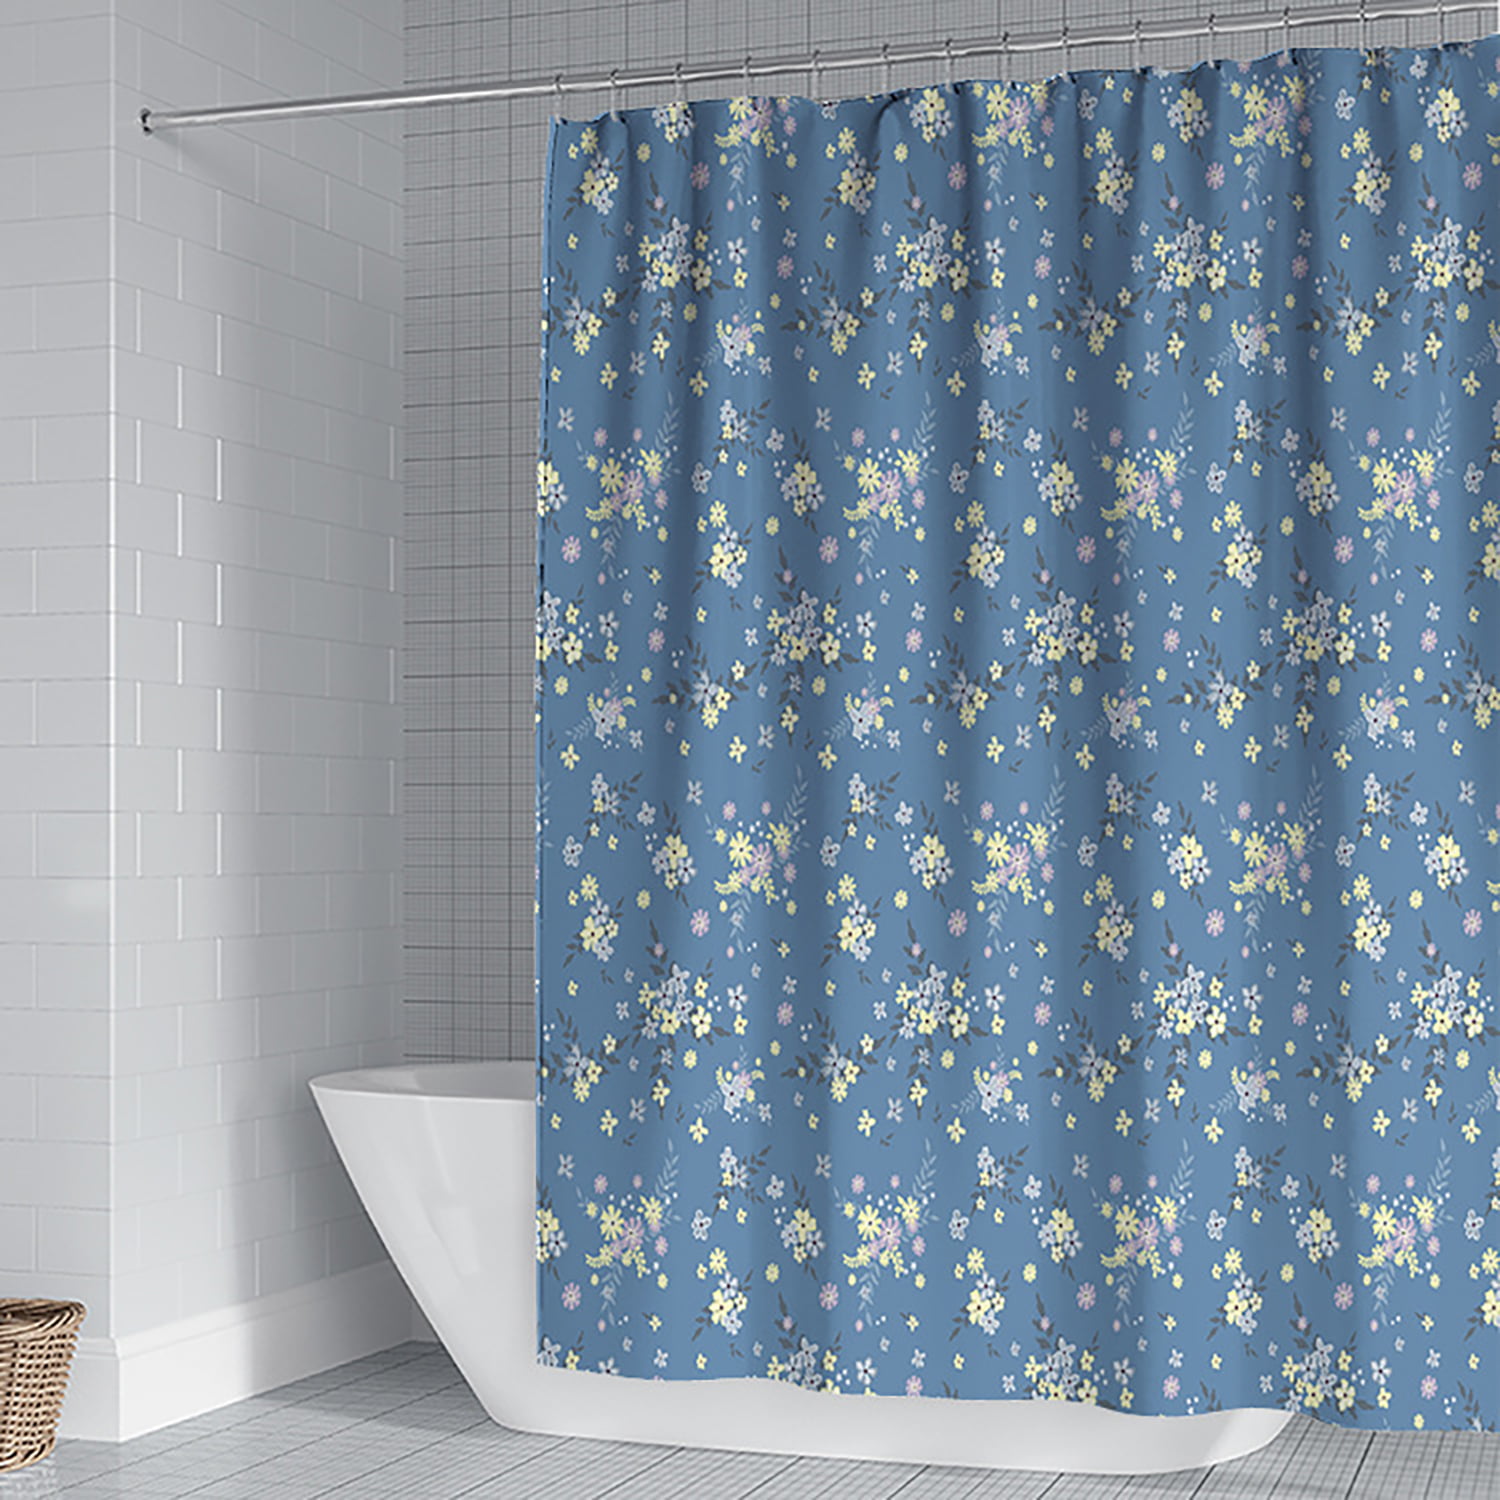 Details about   Spring Colored Flowers Shower Curtain Bathroom Decor Fabric 12hooks 71" 